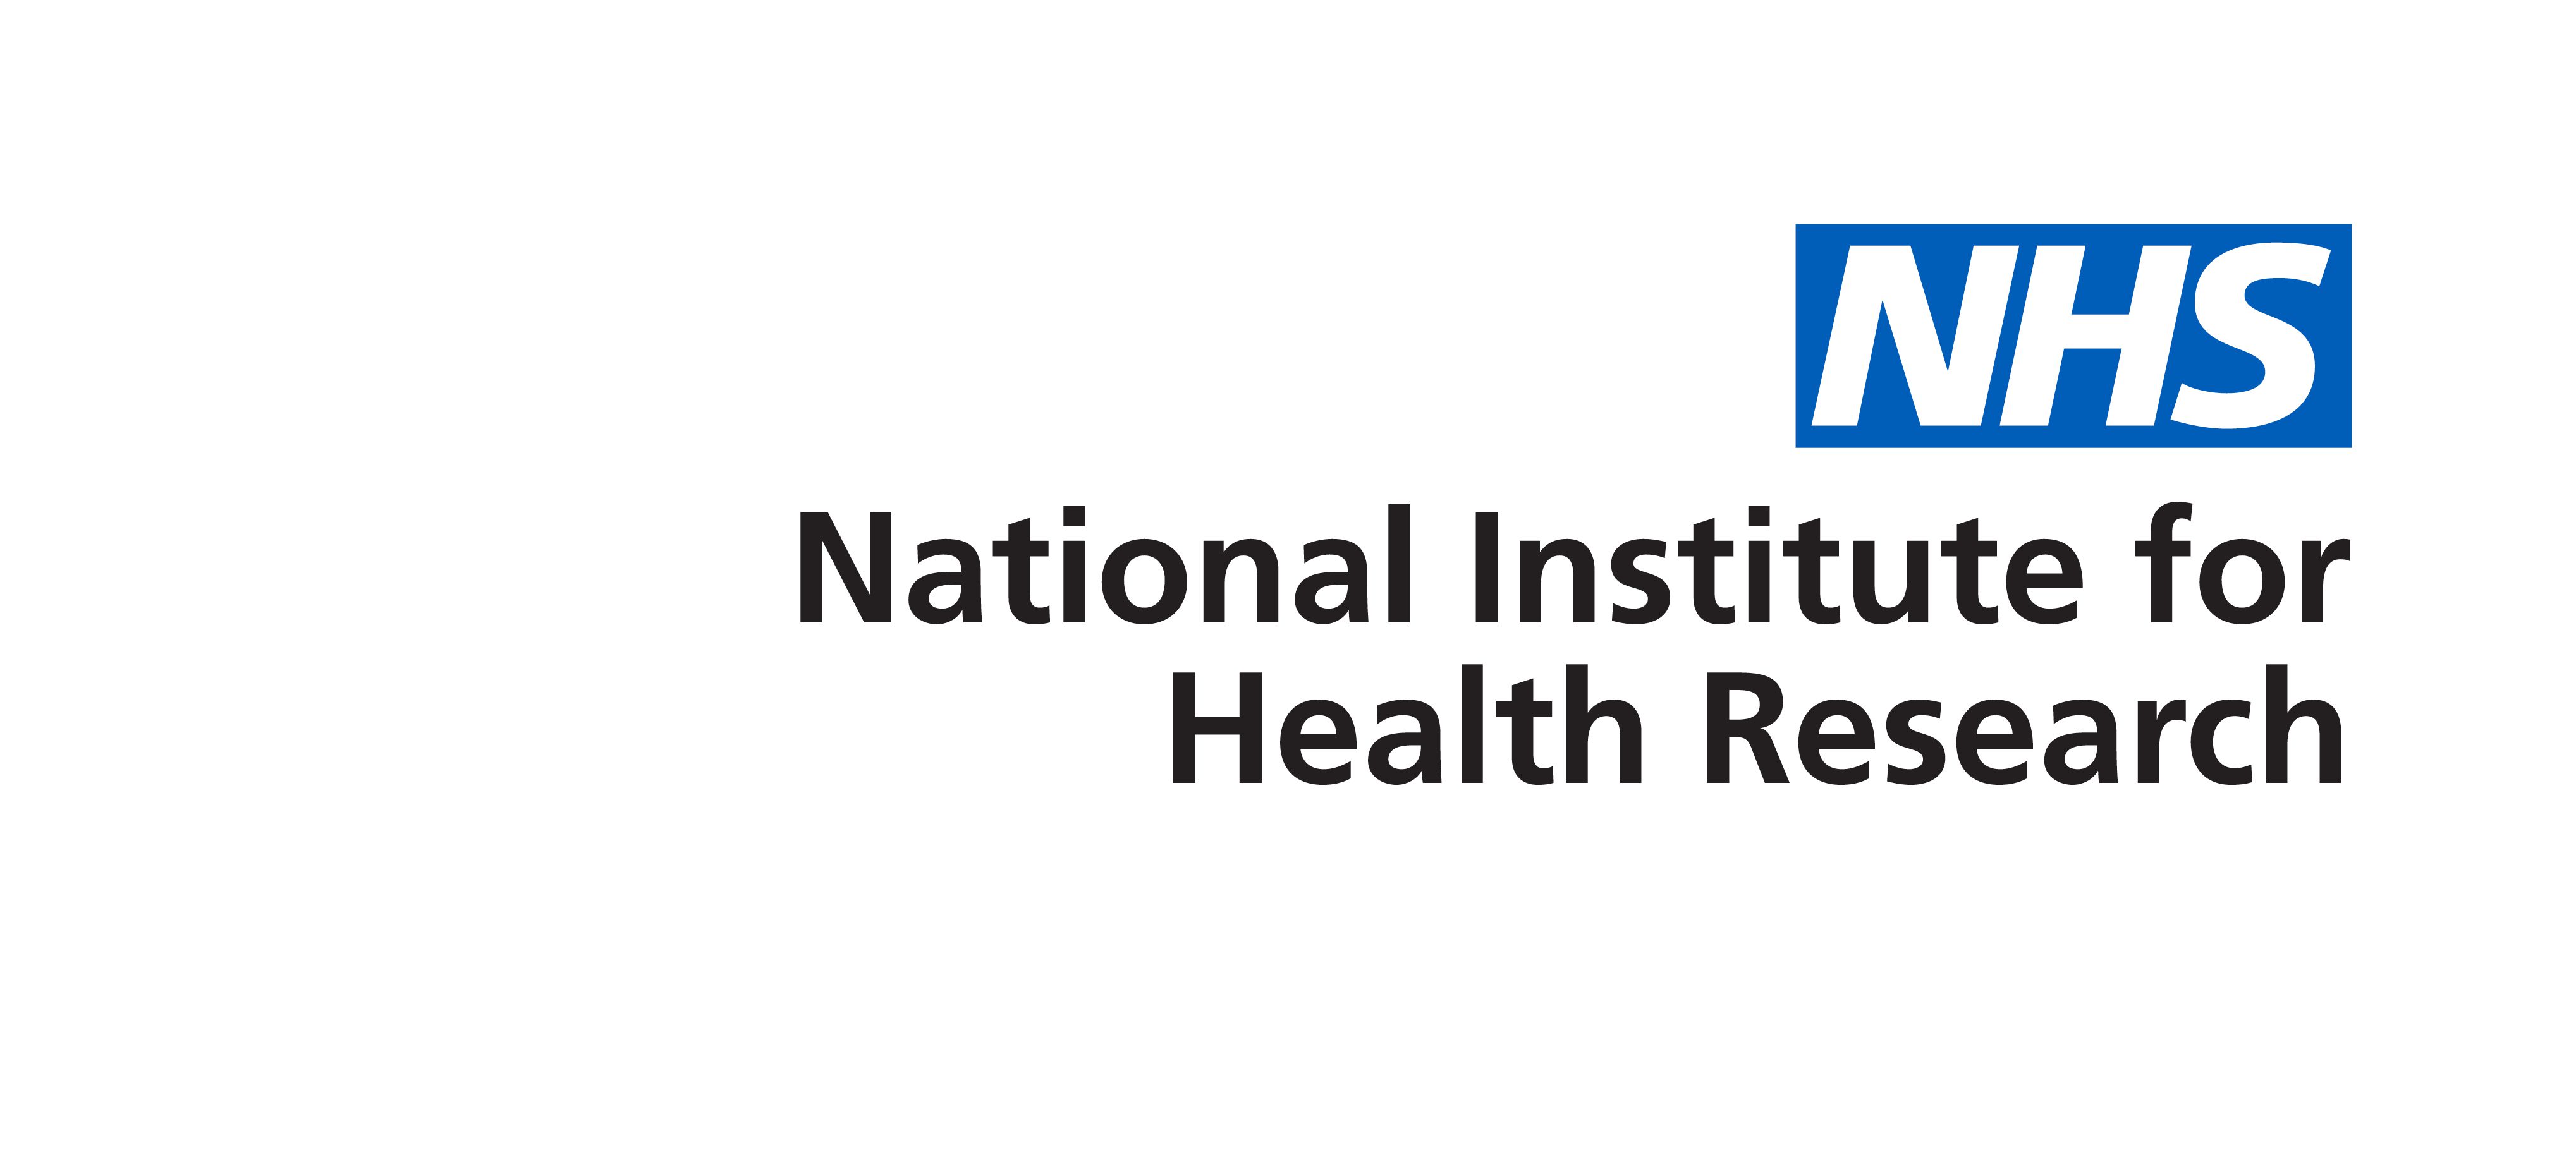 £135m NHS Funding Announced For Research Into Dementia, Mental Health and Obesity